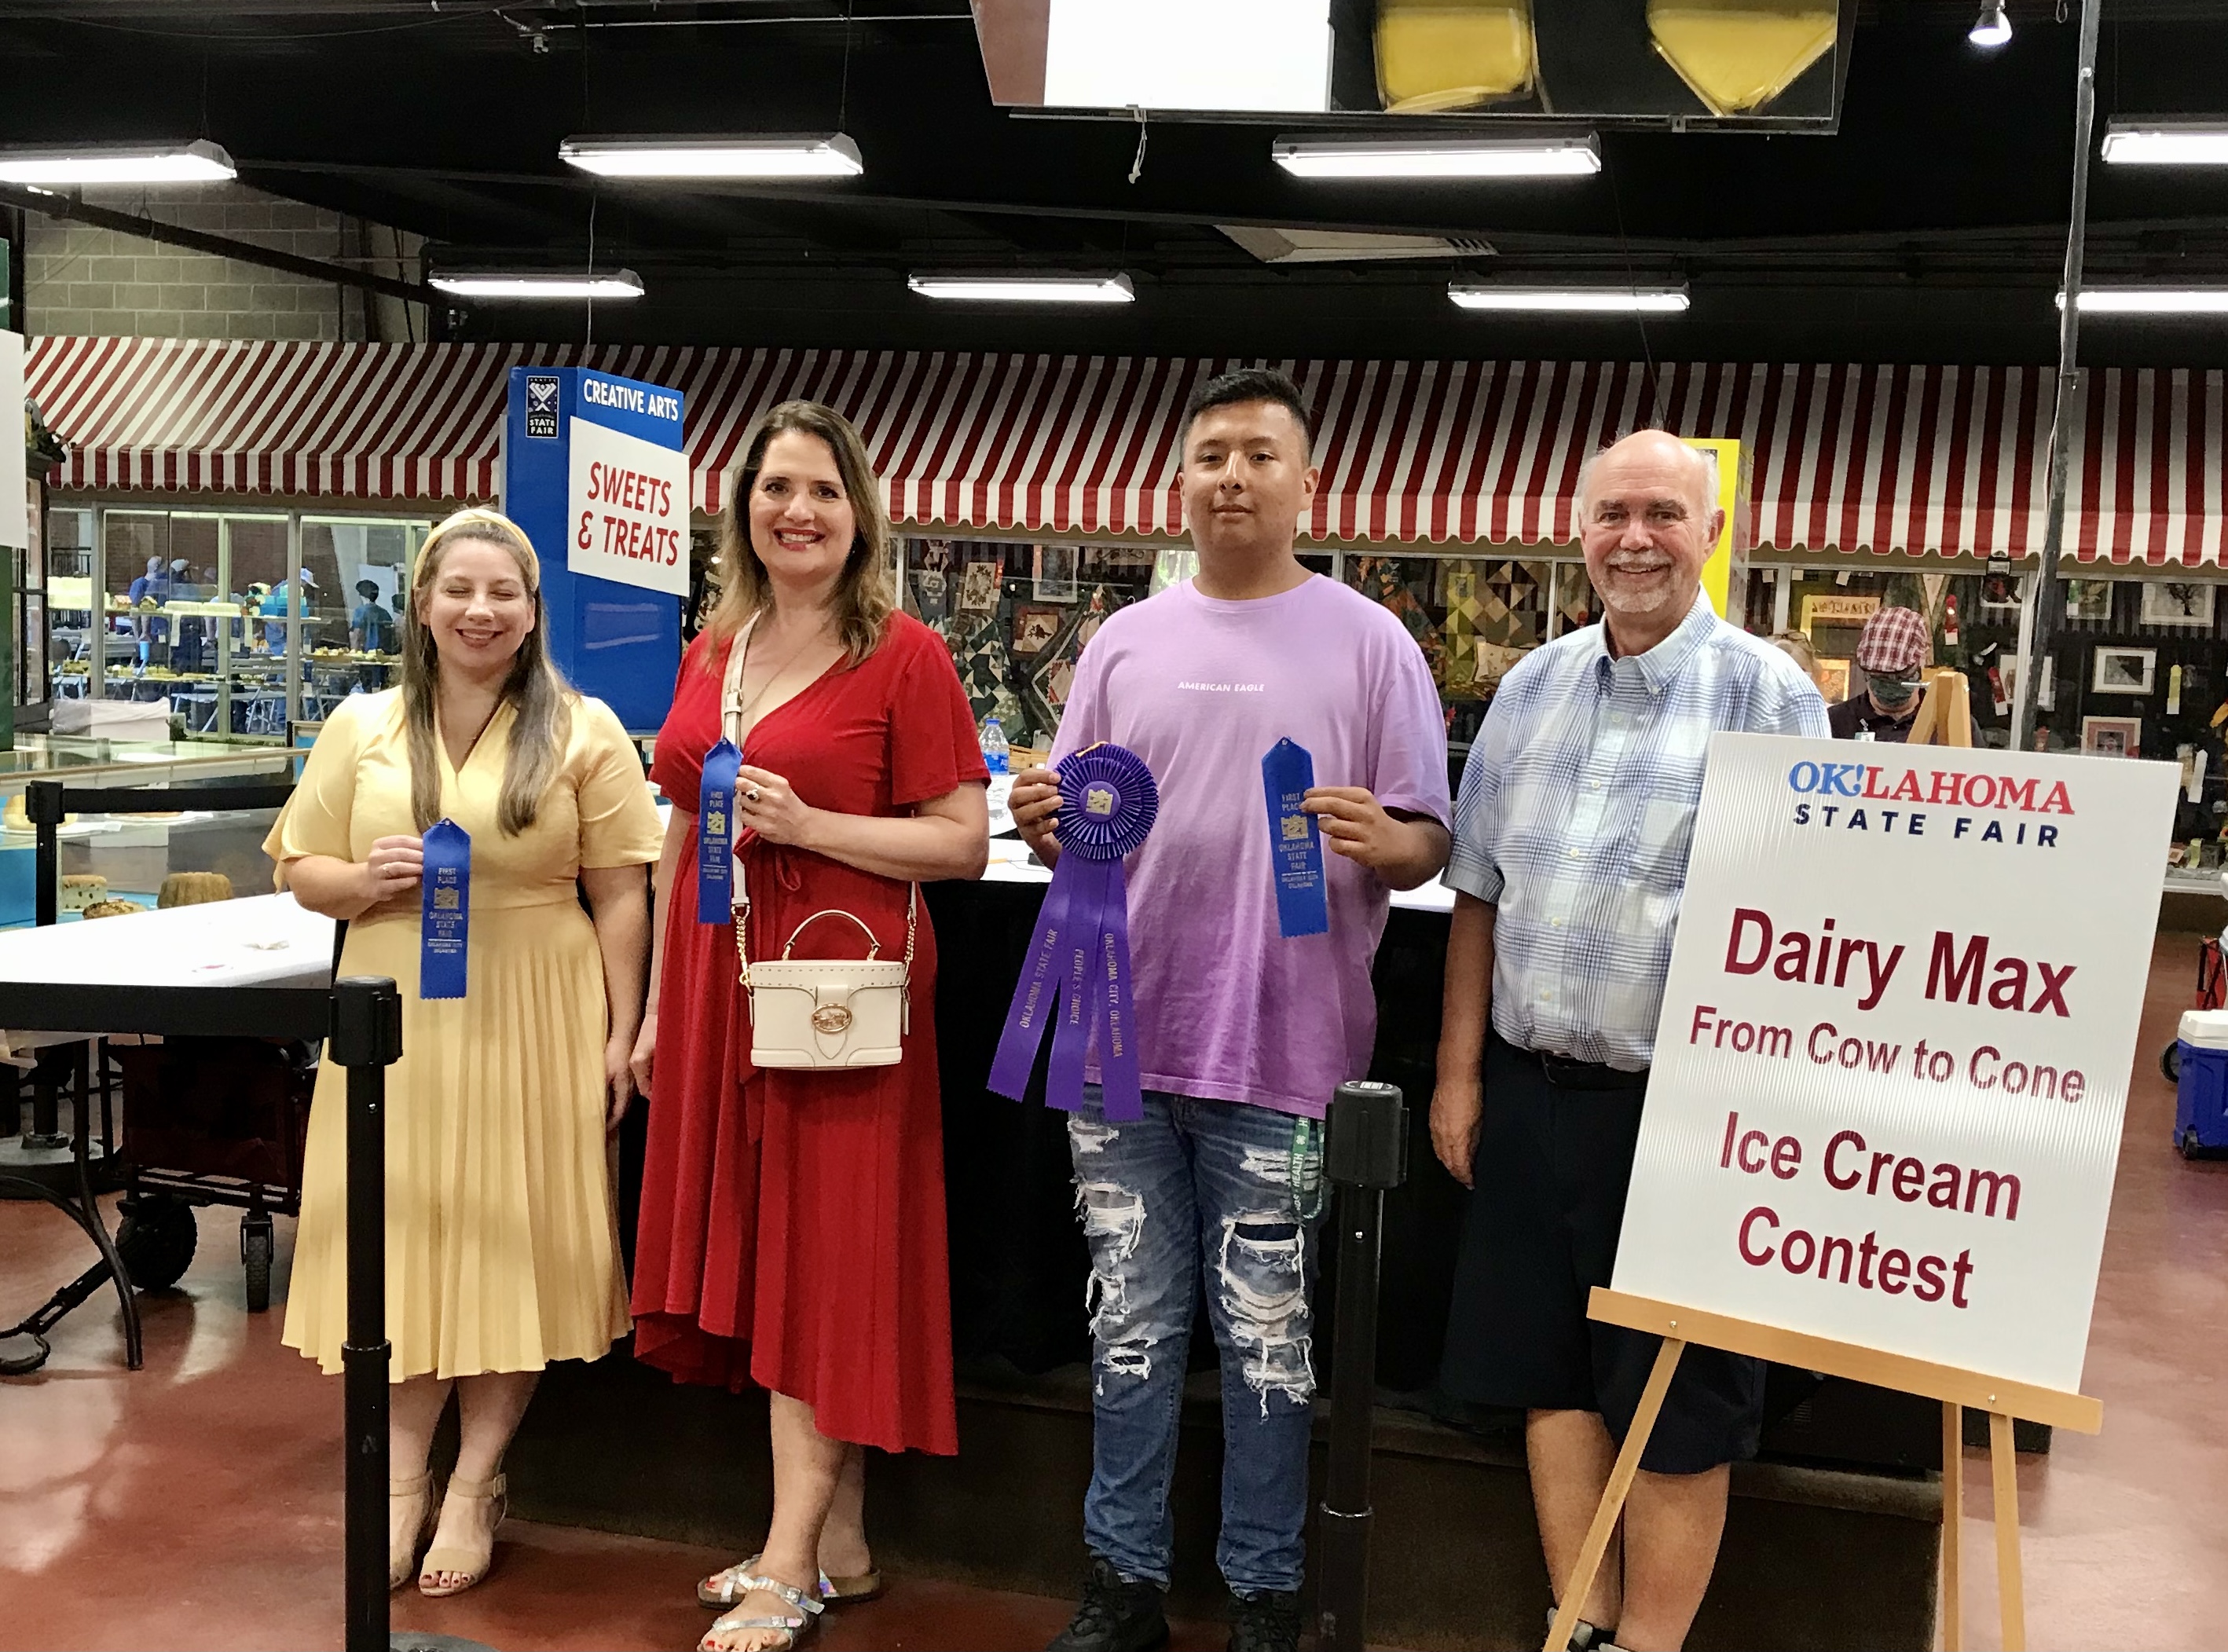 Easy Four Ingredient Ice Cream Recipe Wins People Choice Award at 2021 State Fair of Oklahoma DairyMAX Ice Cream Contest